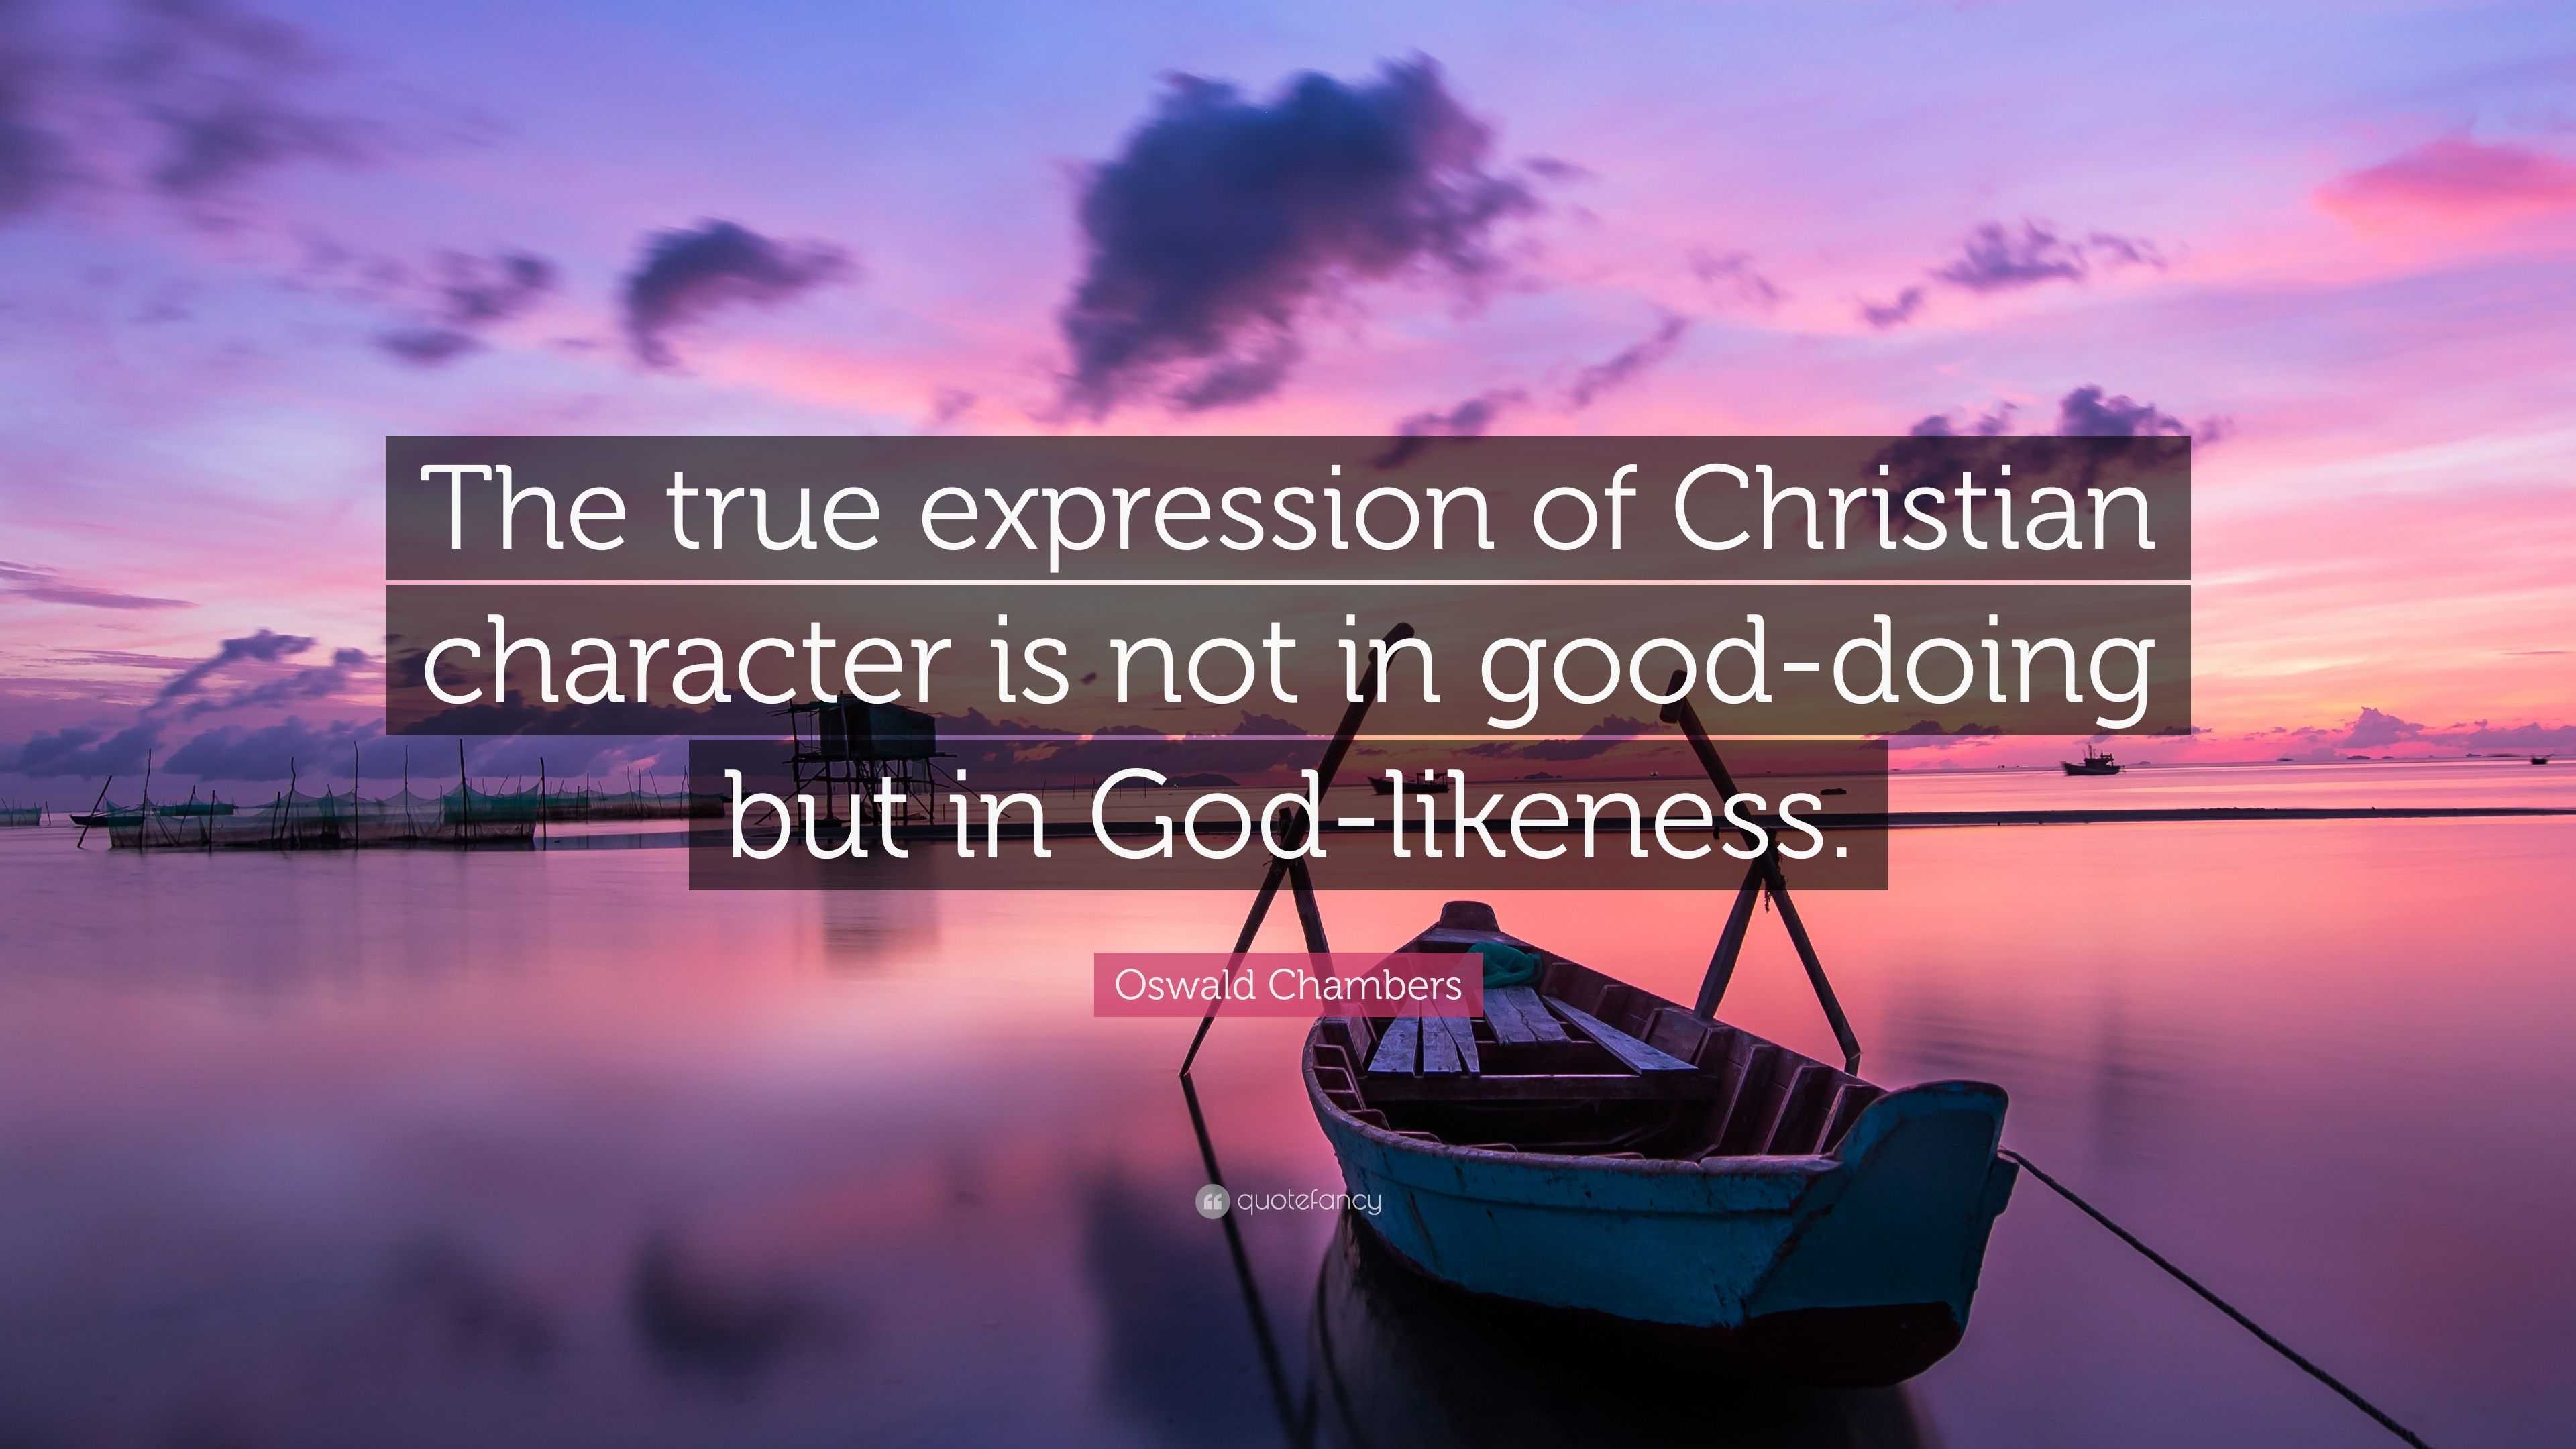 2079540 Oswald Chambers Quote The true expression of Christian character